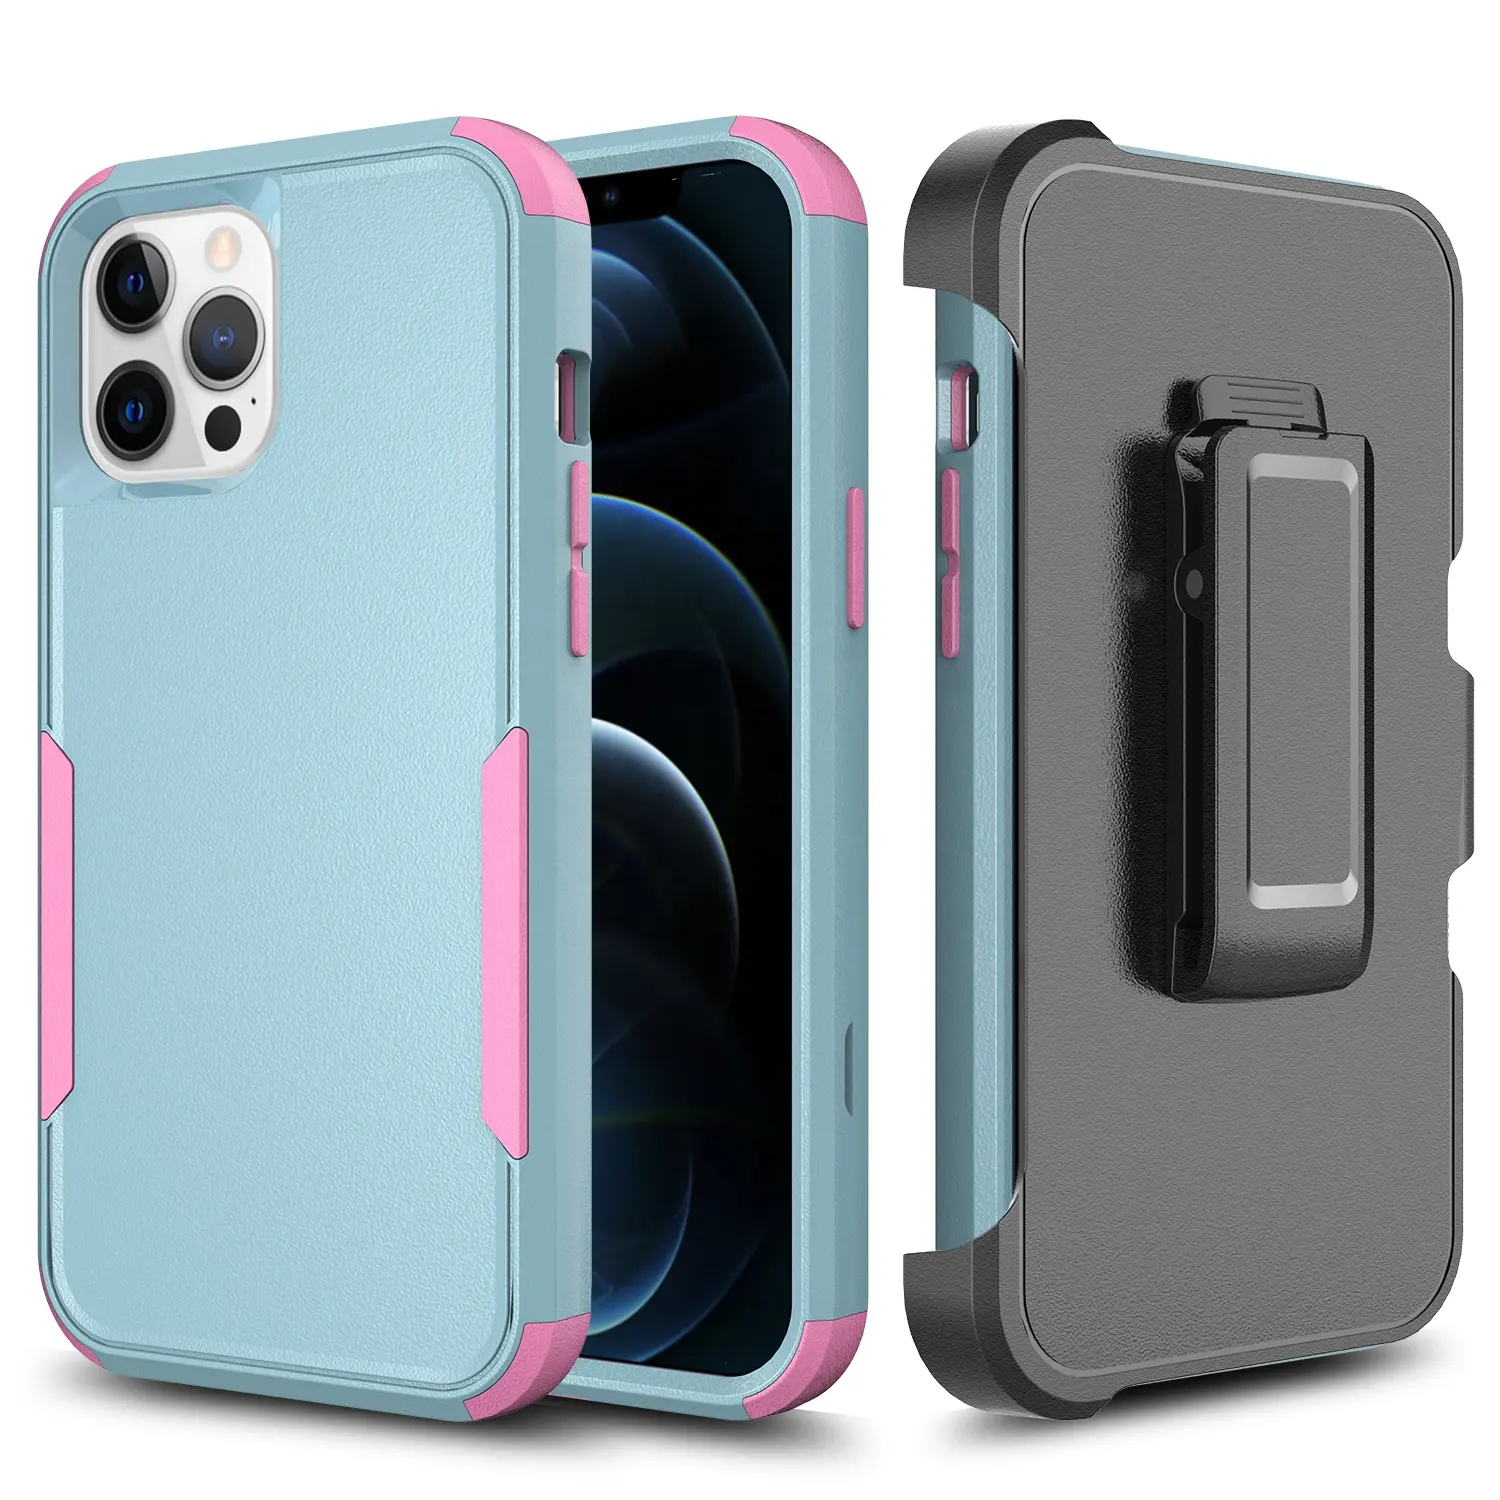 Armor Designed Ultra Protective Case For iPhone 12 PRO MAX Case with Belt Clip Holster